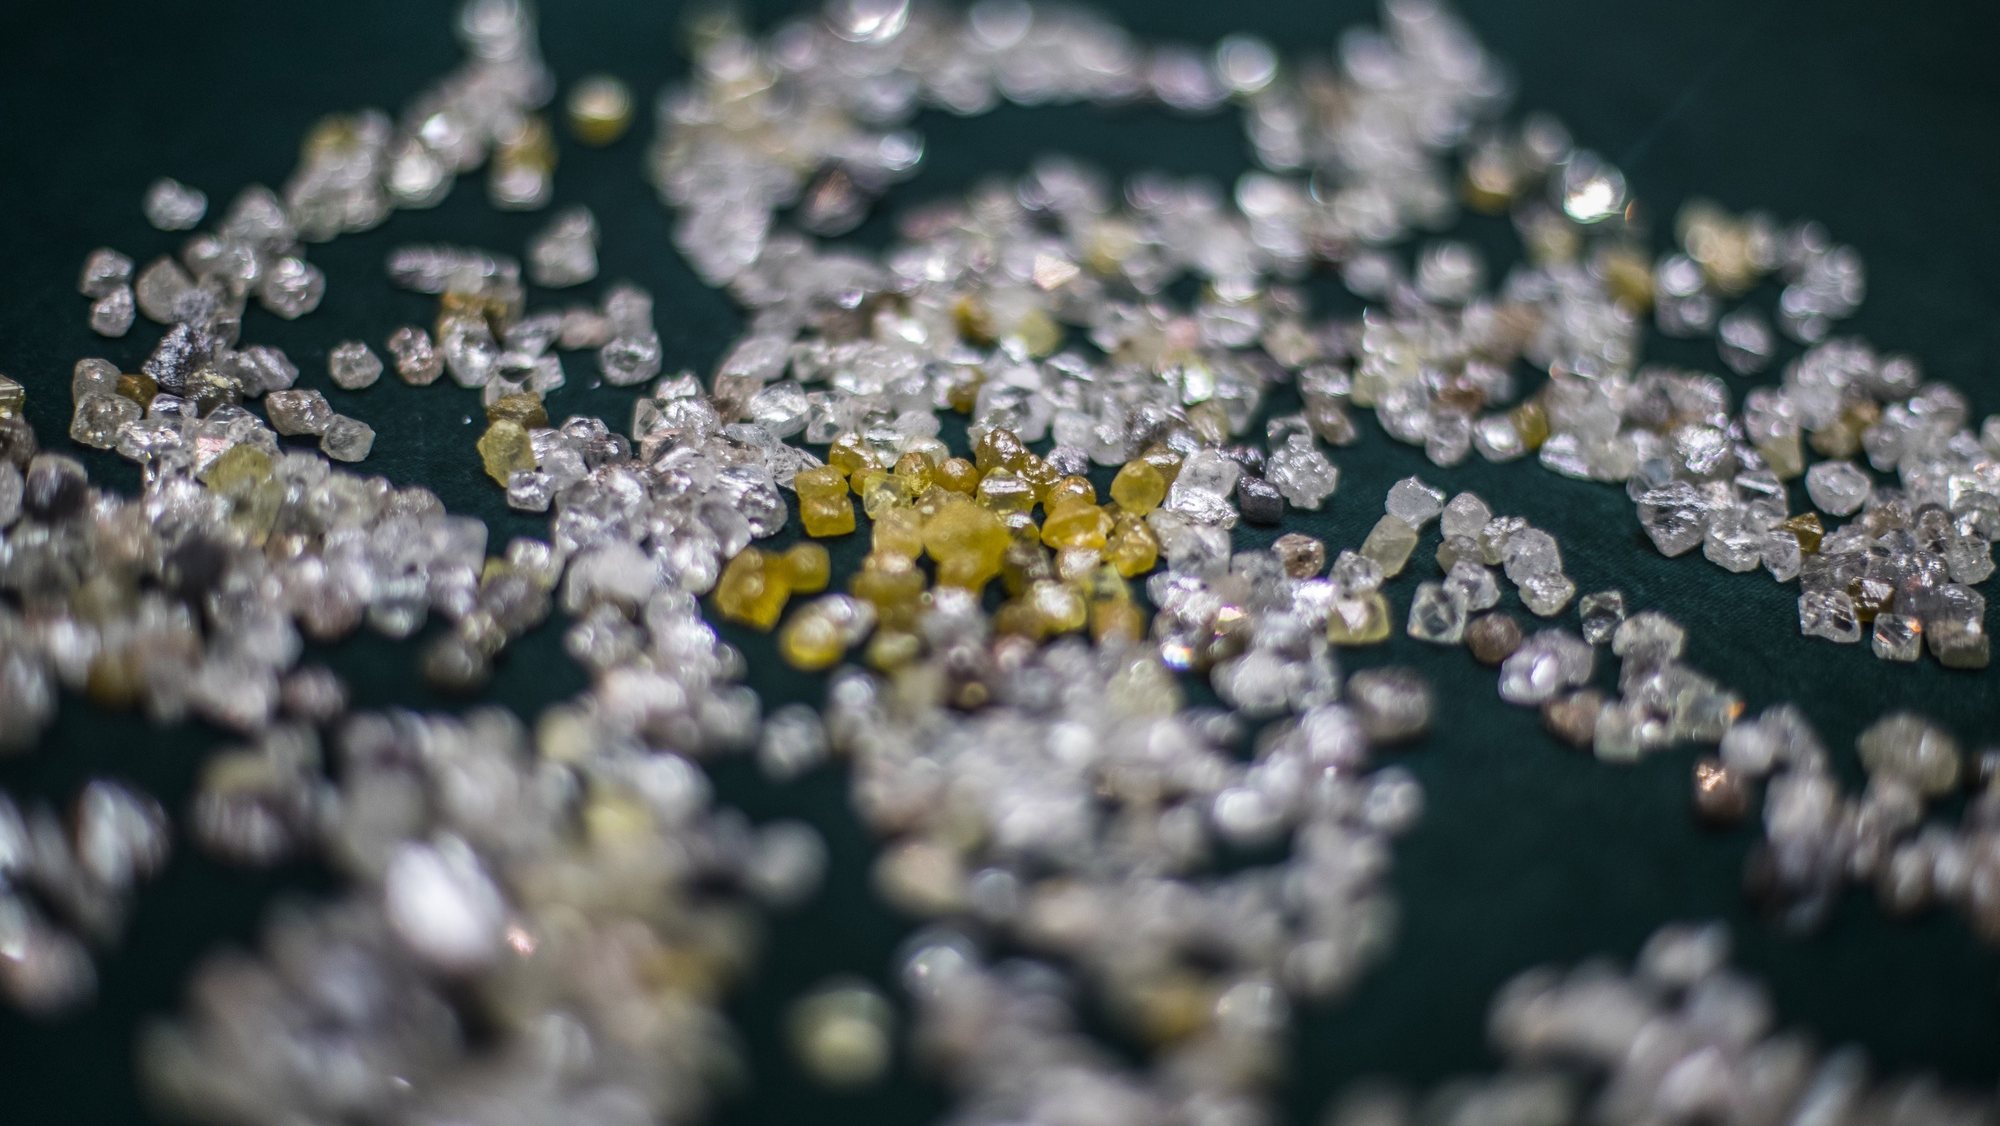 epa07691094 (36/40) Rough diamonds on display at the ALROSA Diamond Sorting Center (DSC) in Mirny, Sakha (Yakutiya) Republic, Russia, 19 June 2019. The Russian diamond mining company ALROSA operates 12 kimberlite pipes and 16 alluvial deposits in the country&#039;s Republic of Sakha (Yakutia) and Arkhangelsk region and employs some 37,000 people at its facilities.  EPA/SERGEI ILNITSKY ATTENTION: For the full PHOTO ESSAY text please see Advisory Notices epa07691056 and epa07691057